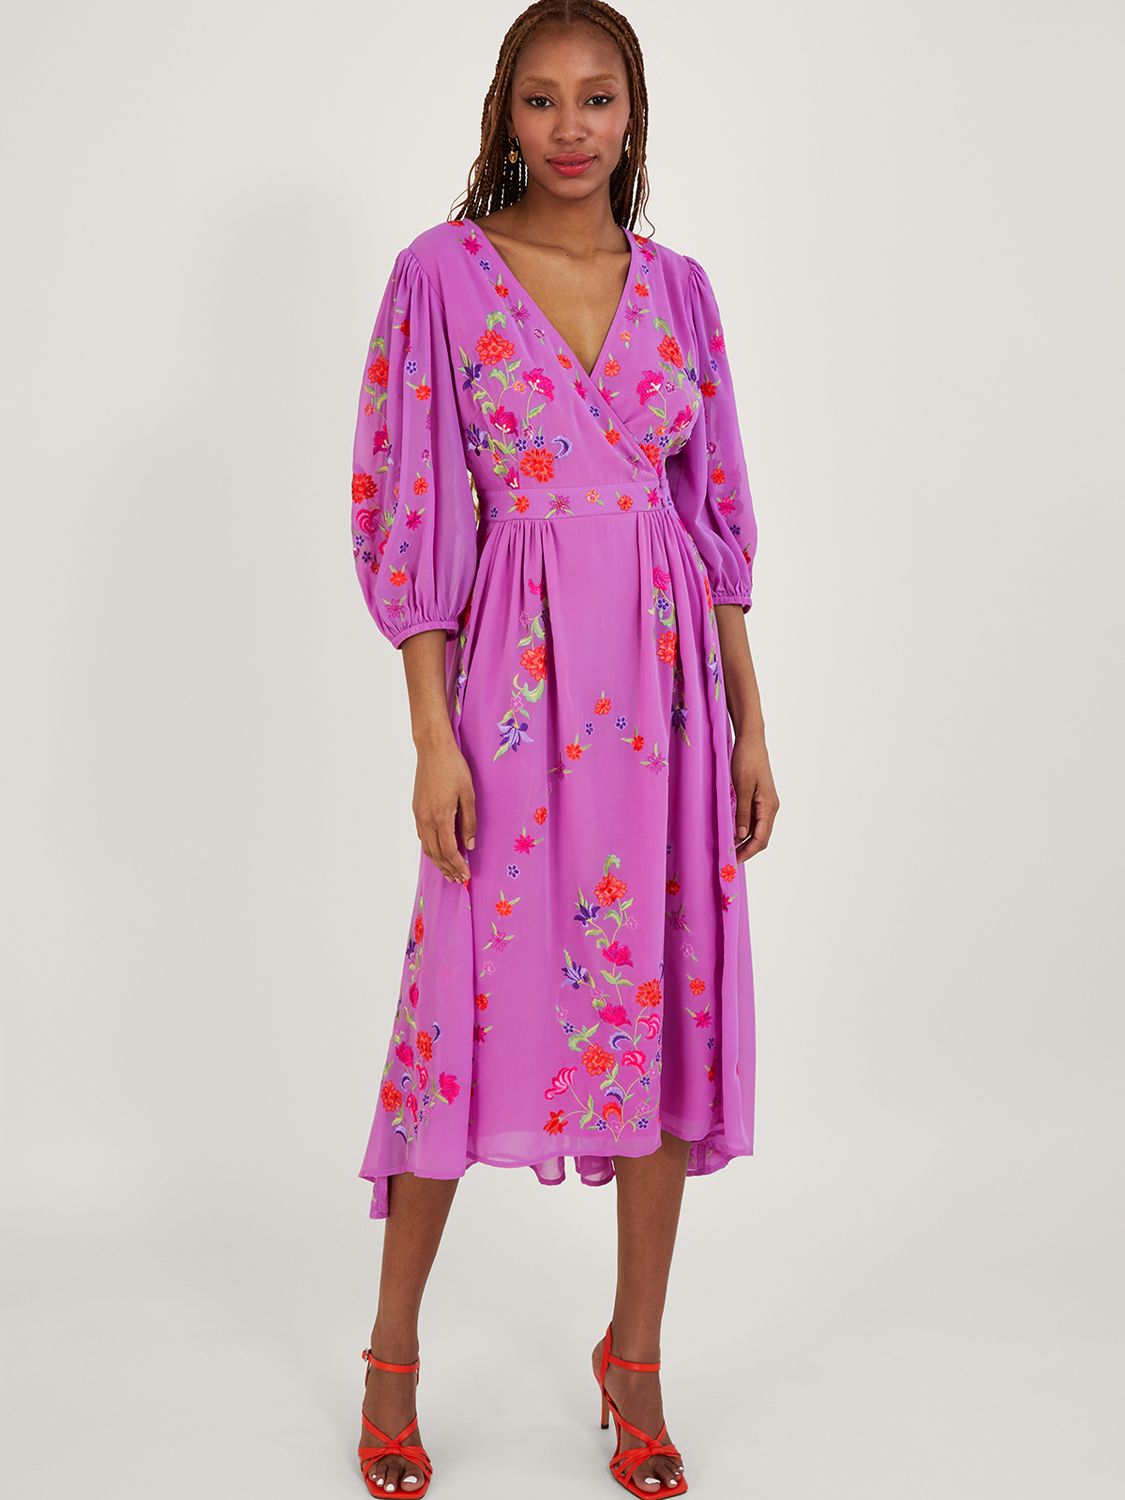 Monsoon Lusia Embroidered Wrap Dress, Lilac at John Lewis & Partners